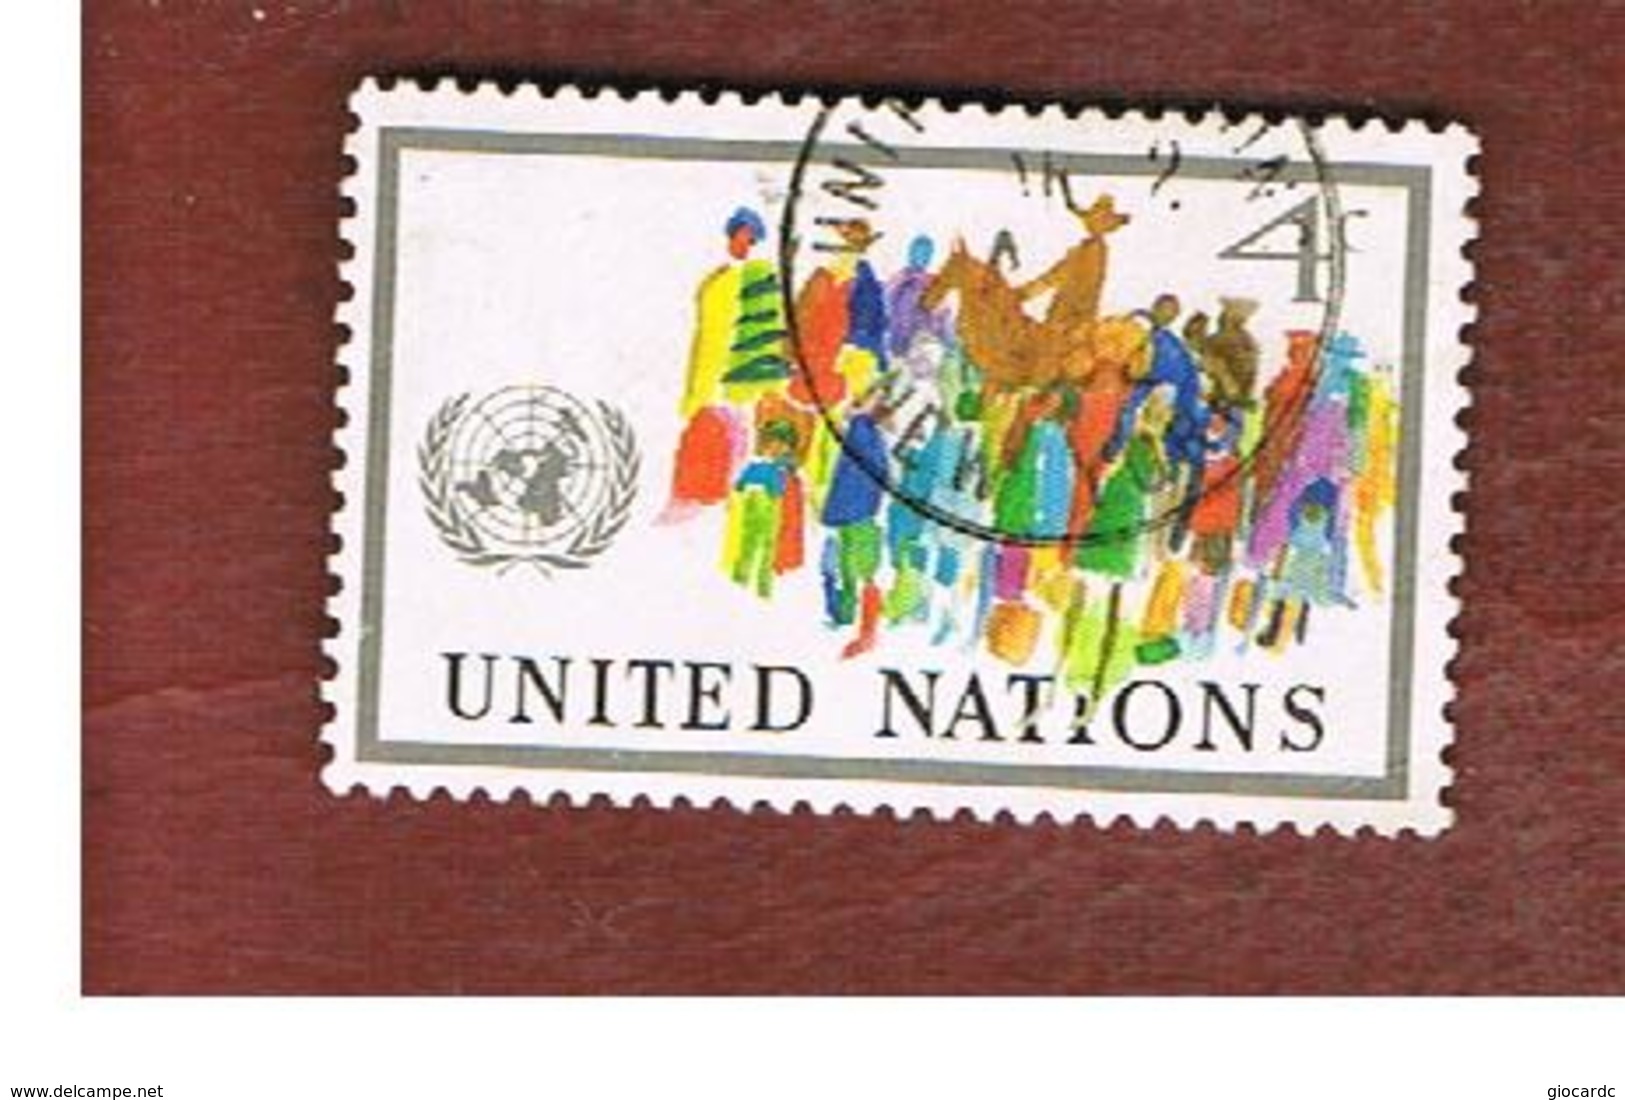 ONU (UNITED NATIONS) NEW YORK   - SG NY275   -  1976 GATHERING OF PEOPLES  - USED - Used Stamps